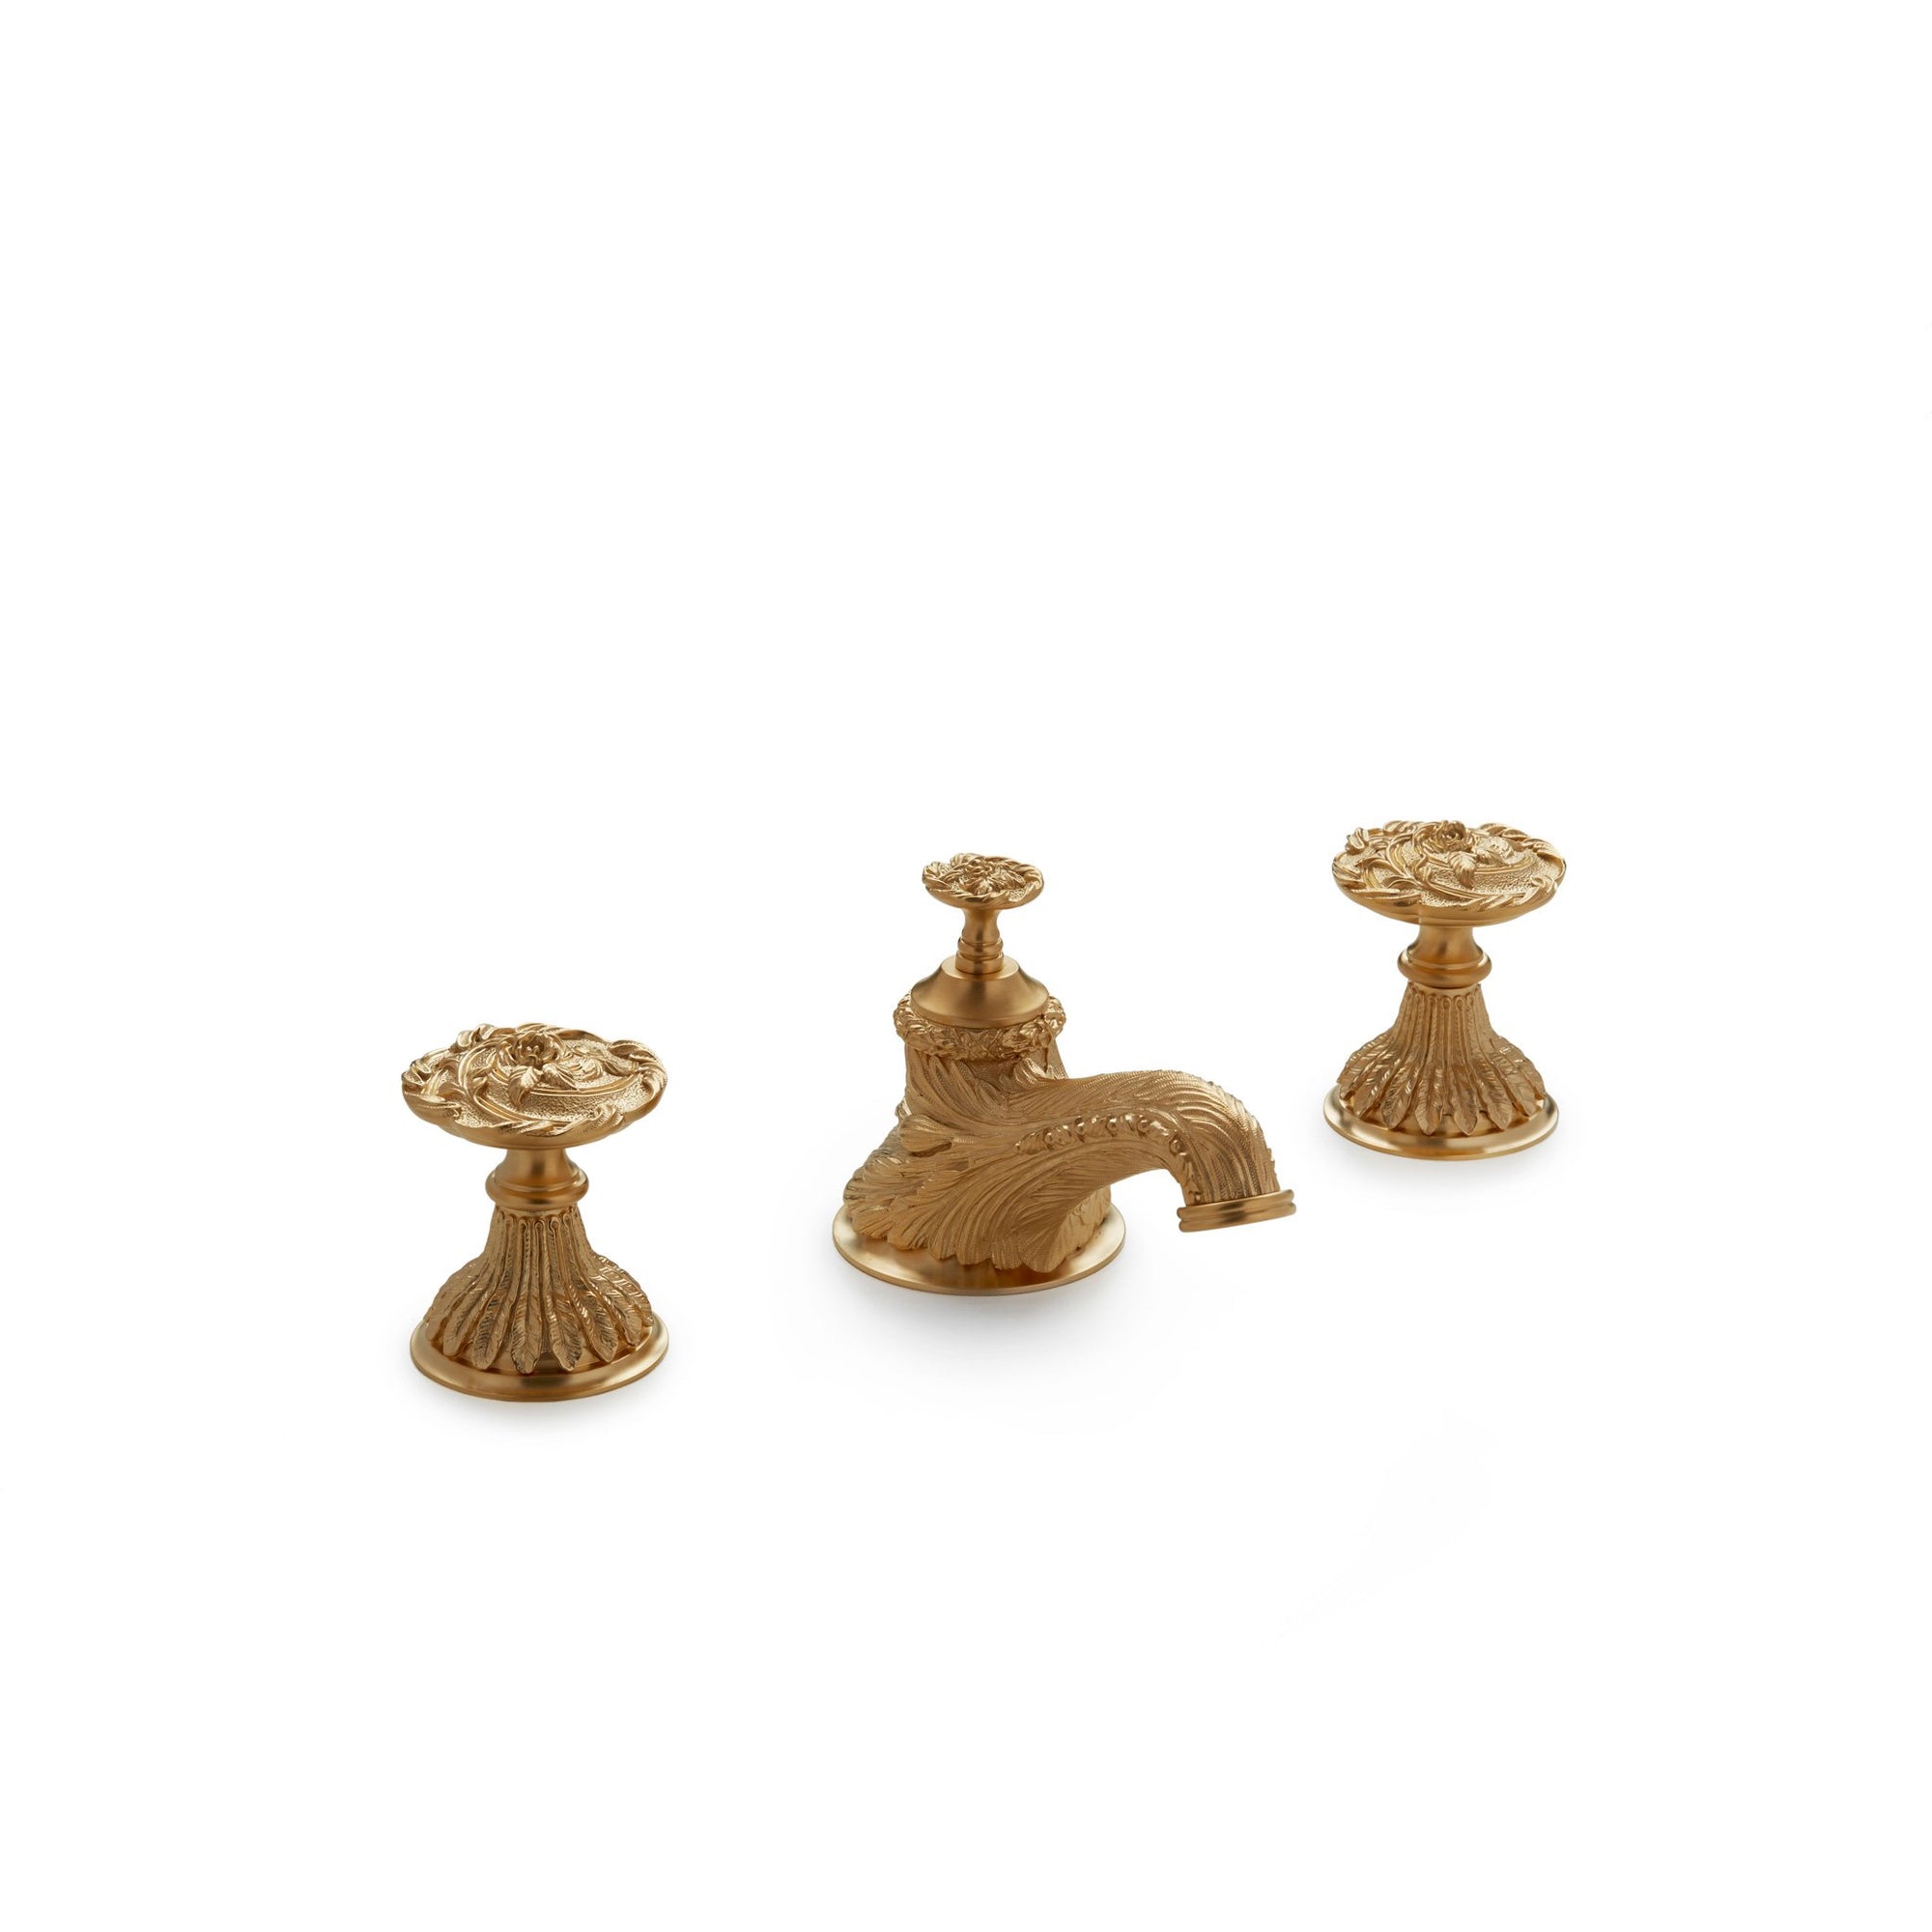 0917BSN-GP Sherle Wagner International French Rose Knob Faucet Set in Gold Plate metal finish